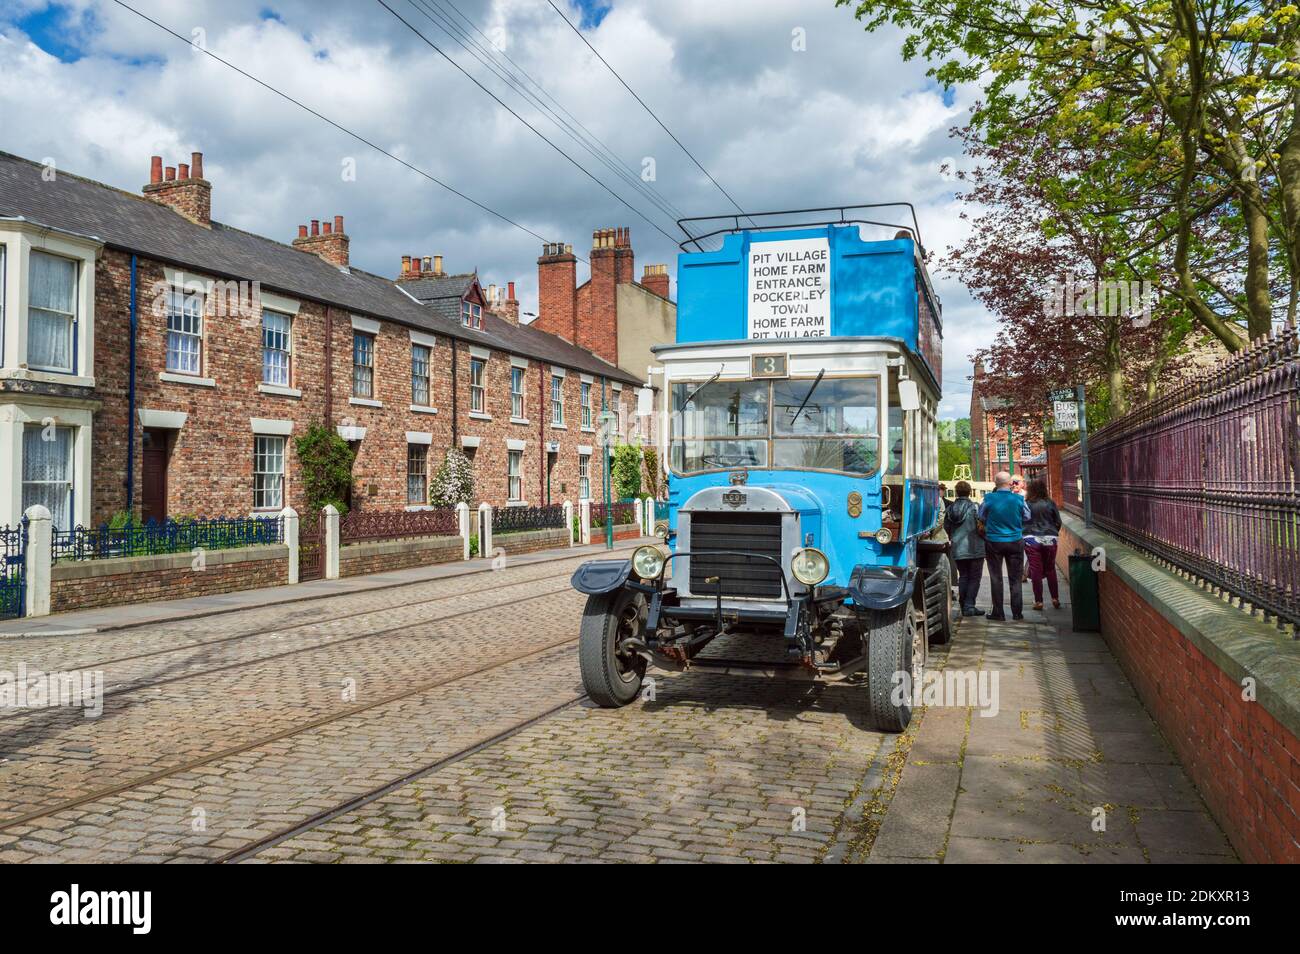 Vintage B Type Bus on cobbled street in the Edwardian village at Beamish Open Air Museum Stock Photo